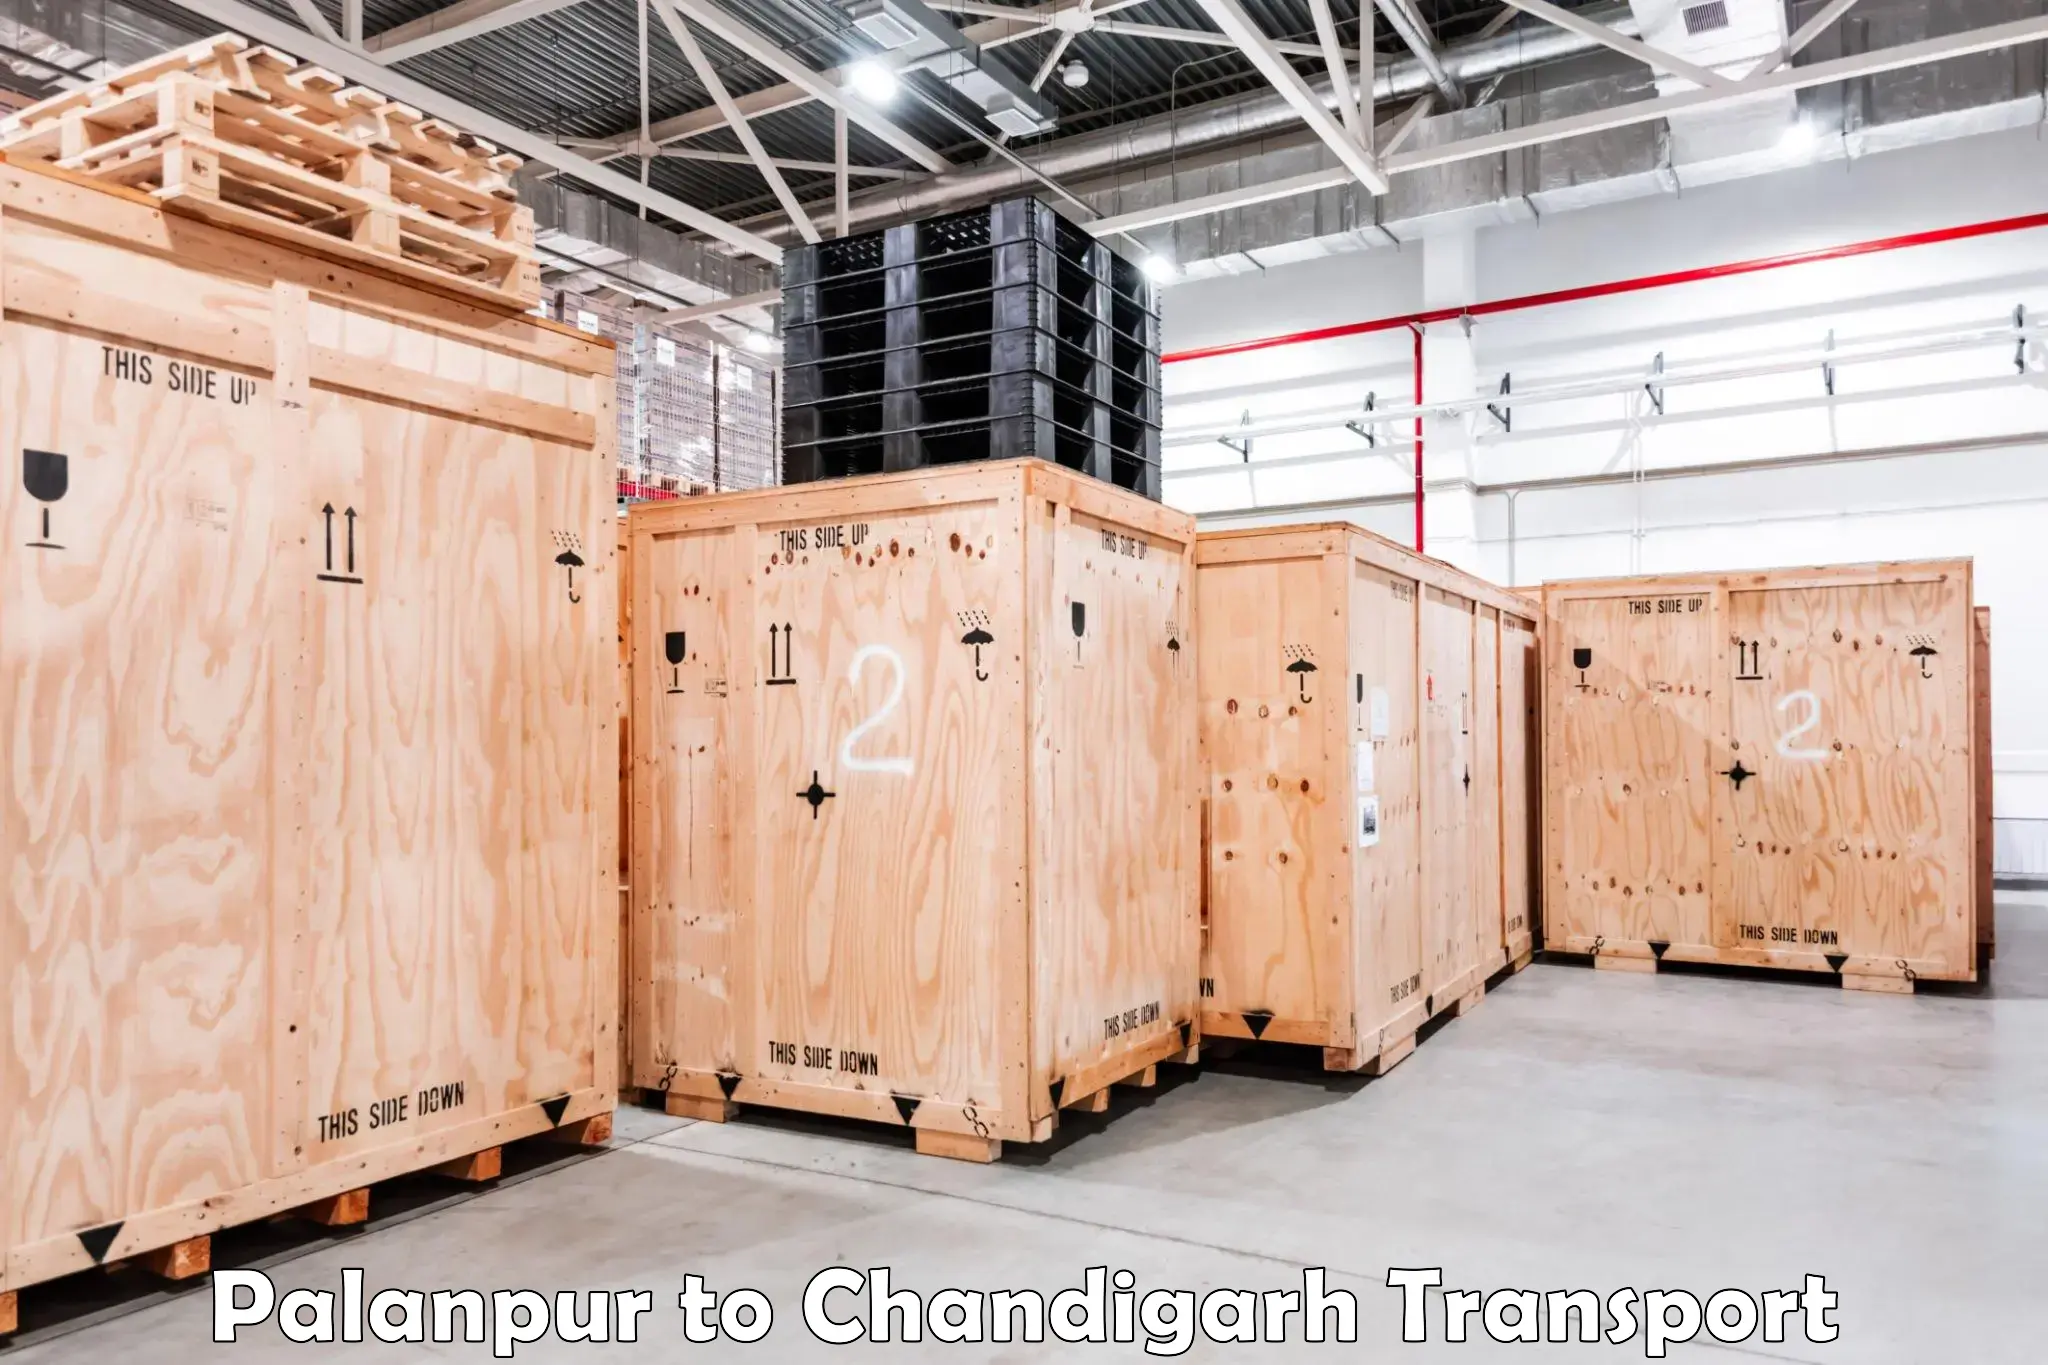 Nearby transport service Palanpur to Chandigarh